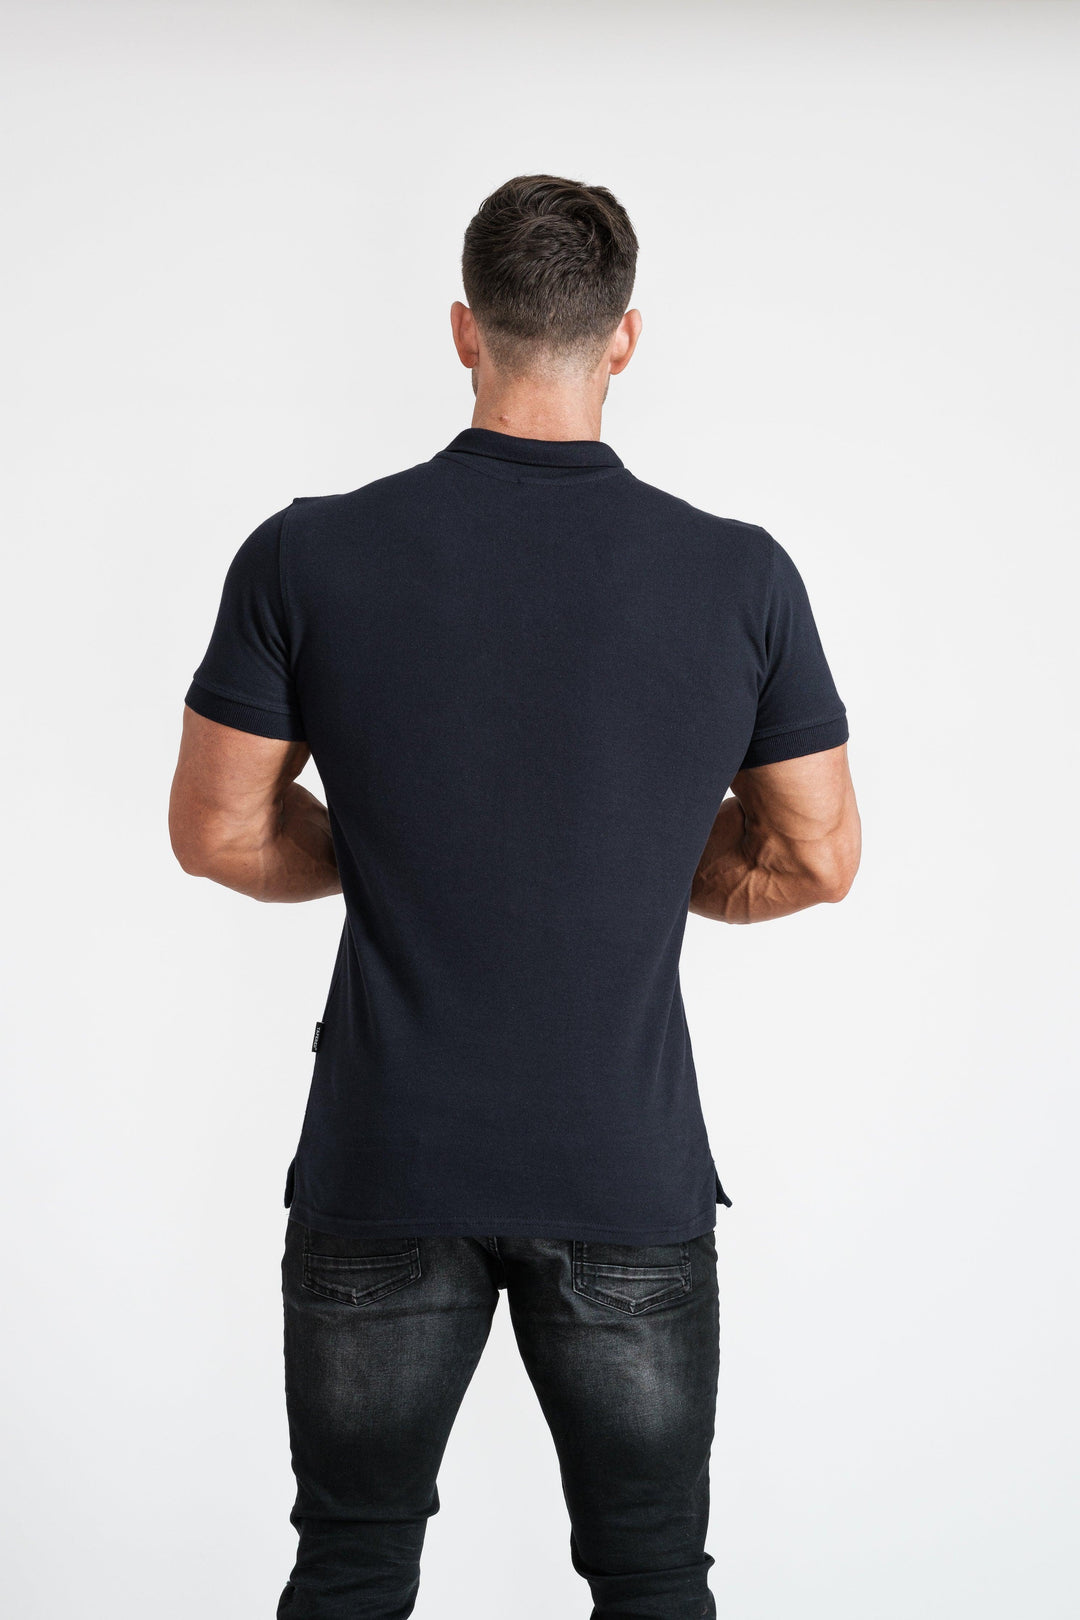 Mens Muscle Fit Polo in Navy. A Proportionally Fitted and Muscle Fit Polo. Ideal for muscular guys.